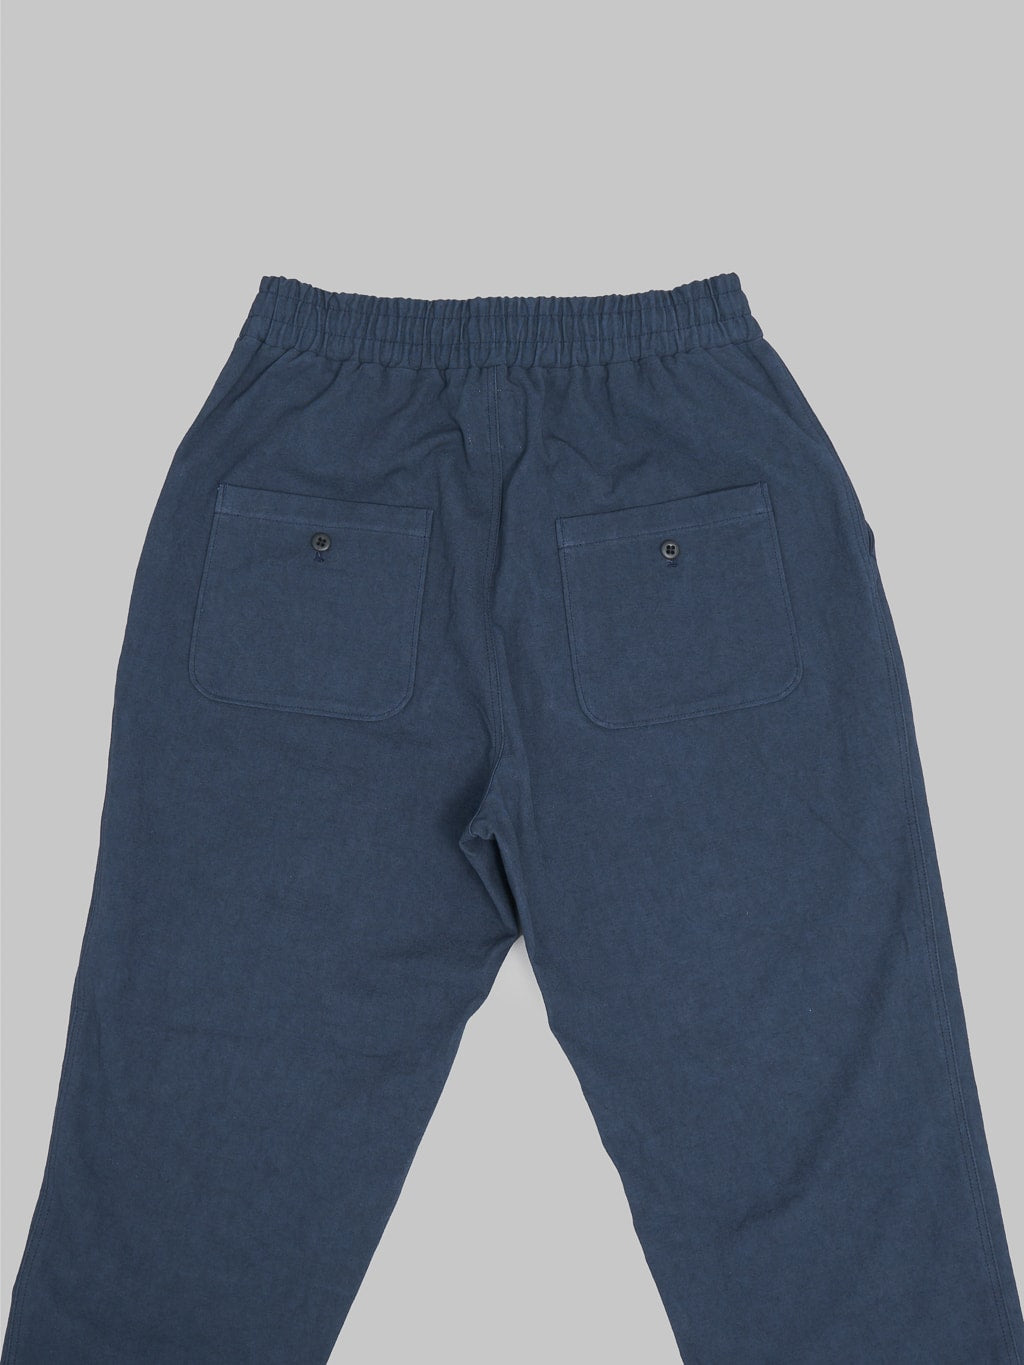 Jackman Canvas Rookie Pants Navy sulfur dyed back pockets